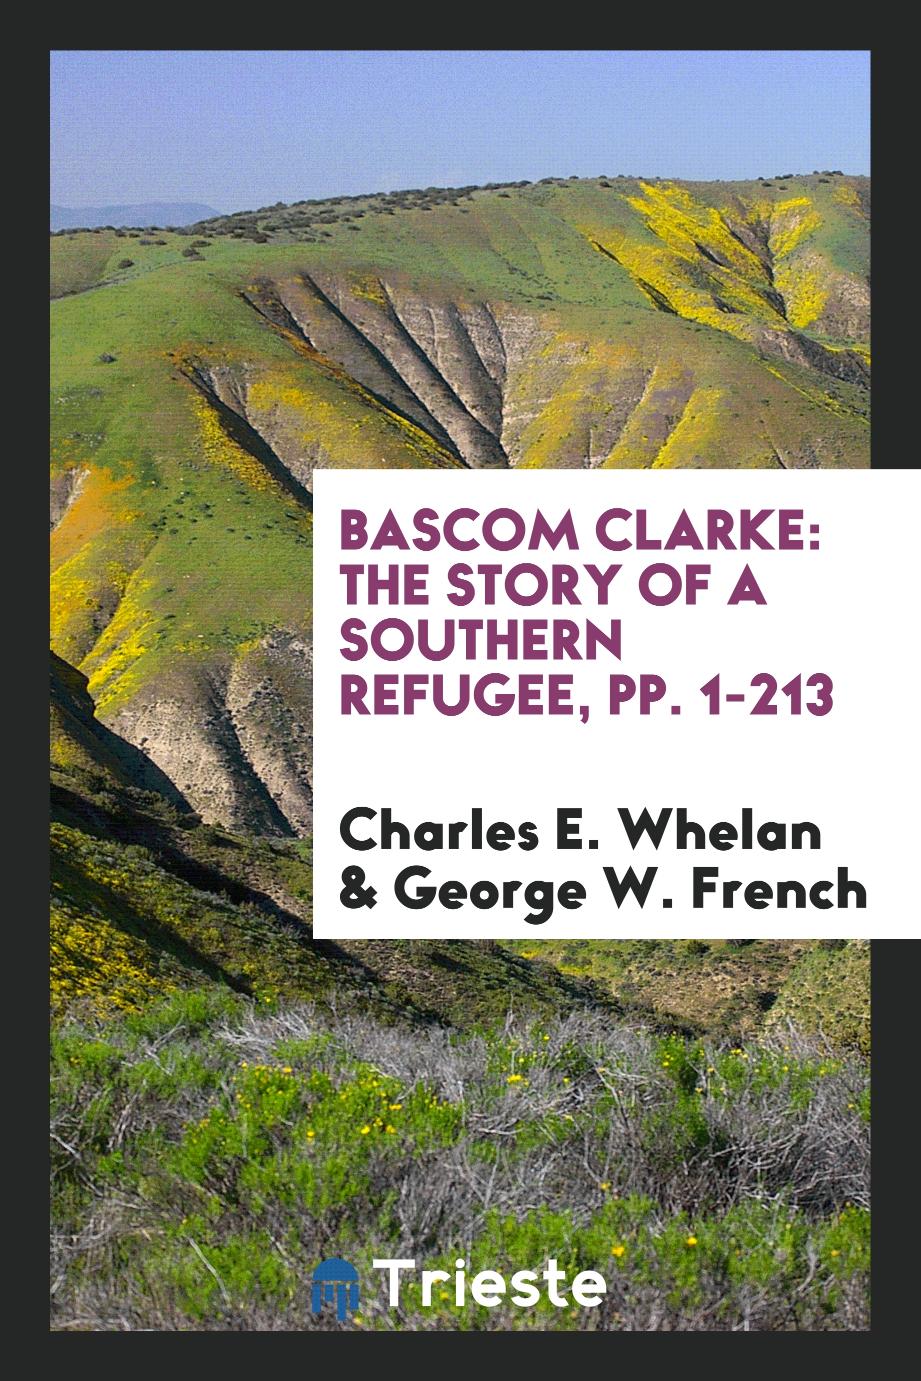 Bascom Clarke: The Story of a Southern Refugee, pp. 1-213